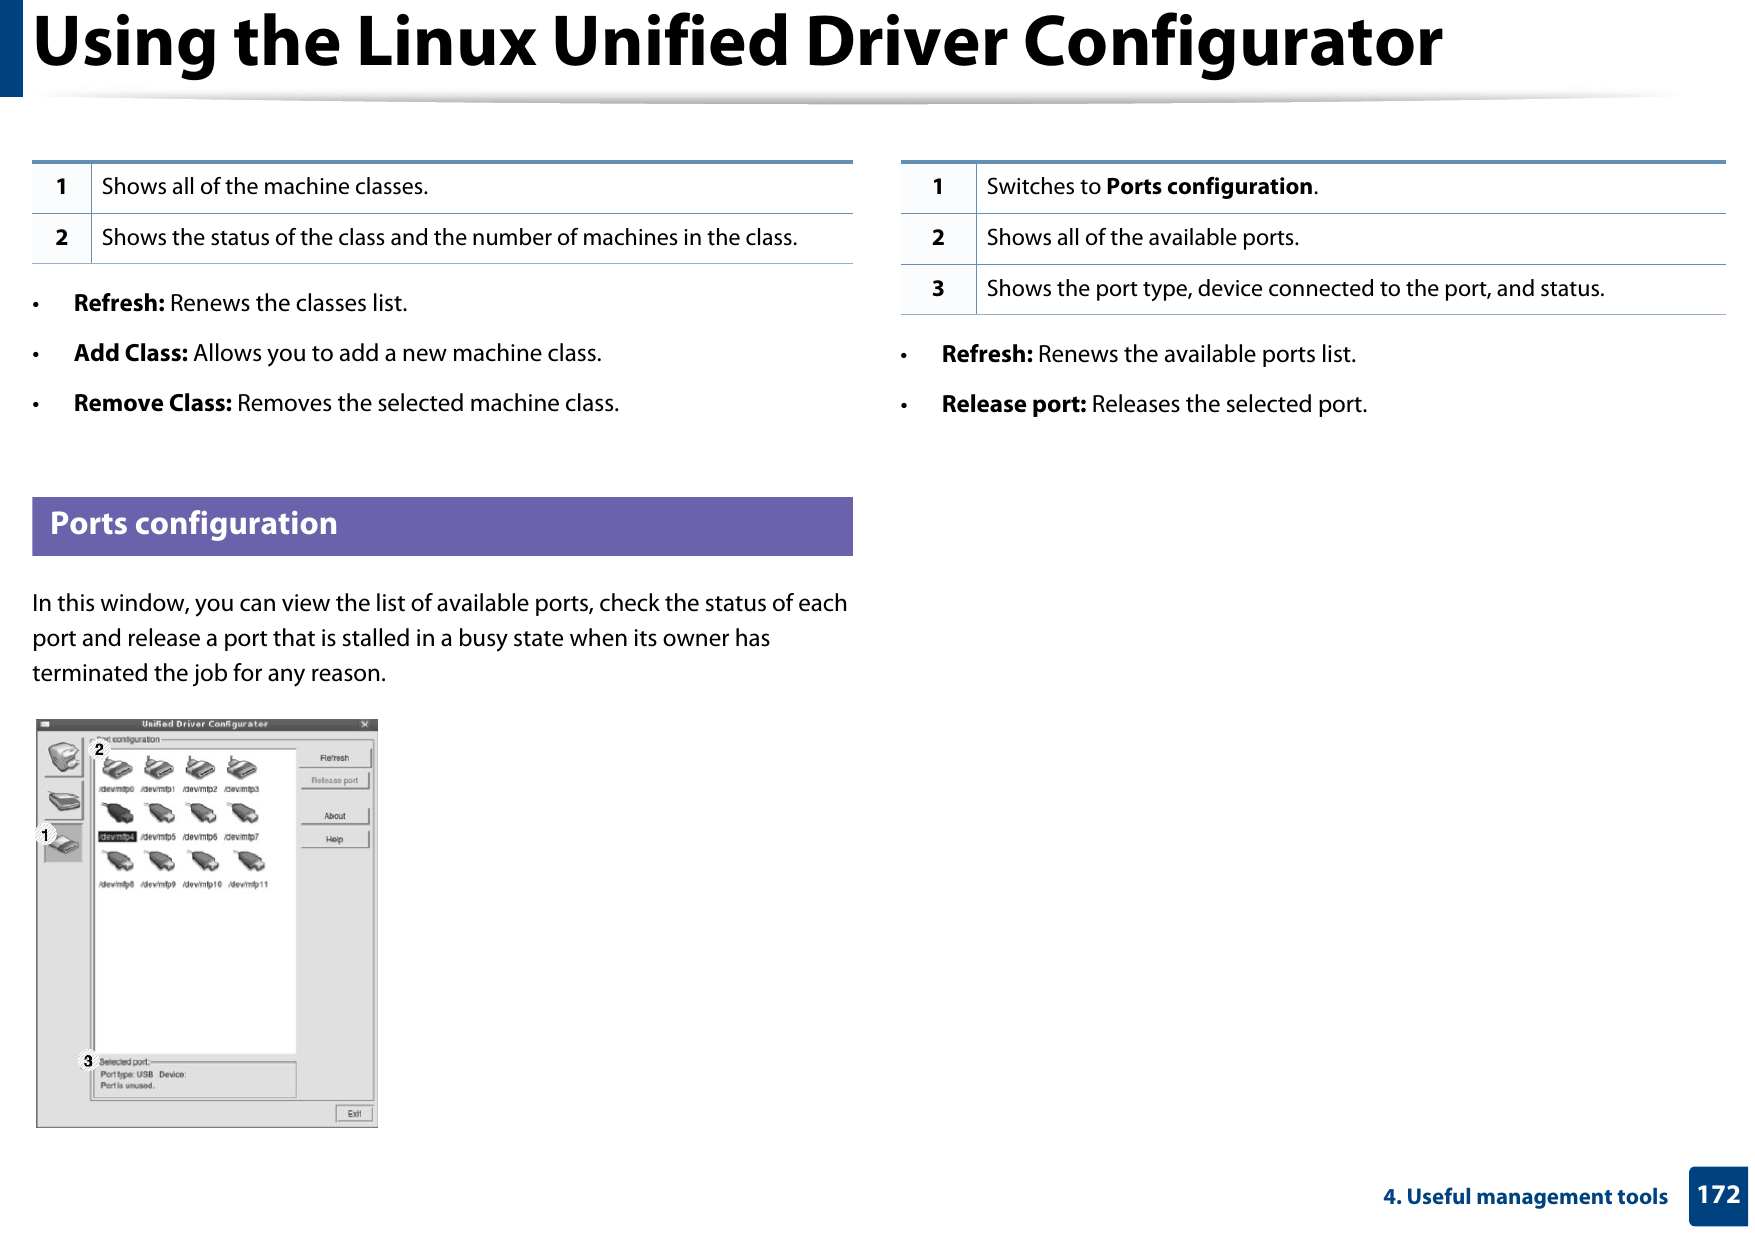 Using the Linux Unified Driver Configurator1724. Useful management tools•Refresh: Renews the classes list.•Add Class: Allows you to add a new machine class.•Remove Class: Removes the selected machine class.12 Ports configurationIn this window, you can view the list of available ports, check the status of each port and release a port that is stalled in a busy state when its owner has terminated the job for any reason.•Refresh: Renews the available ports list.•Release port: Releases the selected port.1Shows all of the machine classes.2Shows the status of the class and the number of machines in the class.1Switches to Ports configuration.2Shows all of the available ports.3Shows the port type, device connected to the port, and status.